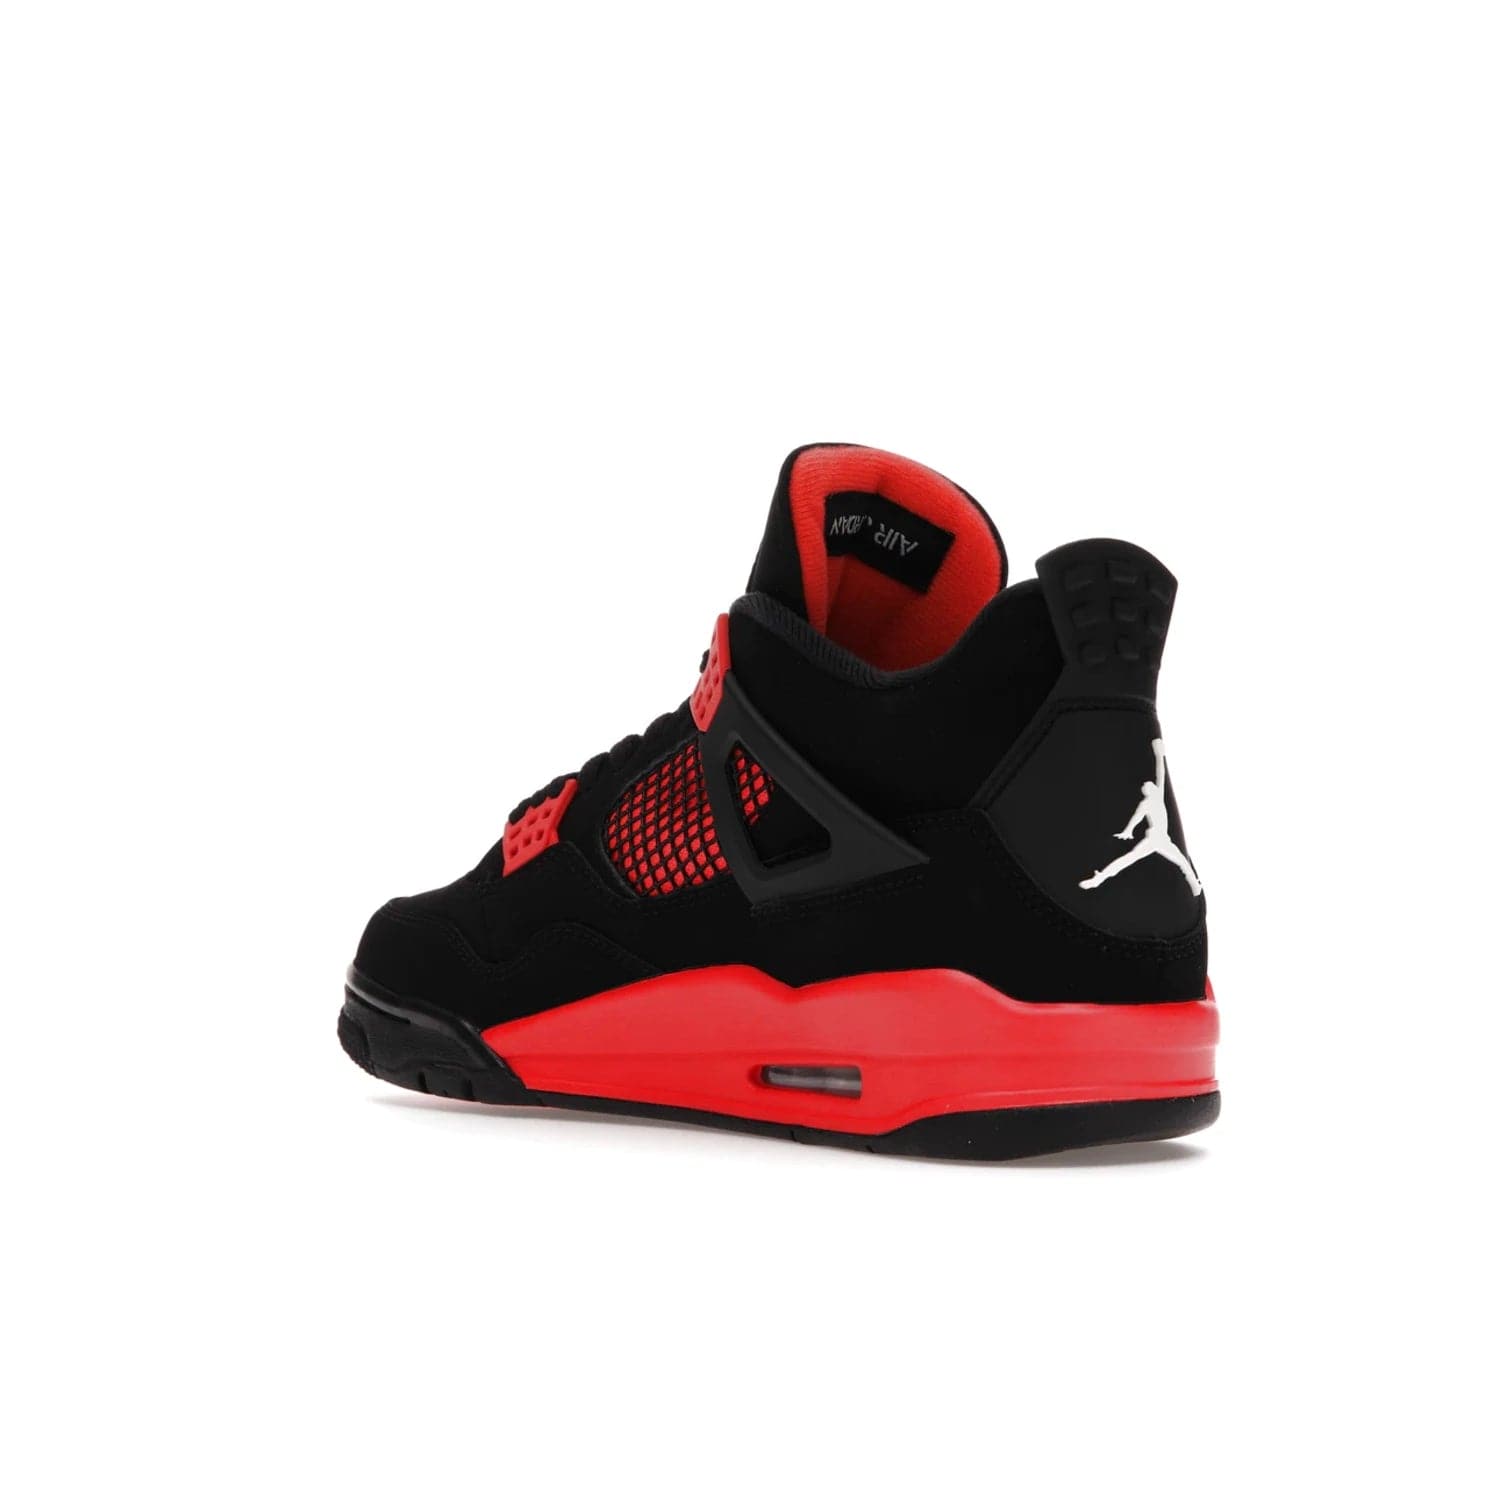 Jordan 4 Retro Red Thunder - Image 24 - Only at www.BallersClubKickz.com - Upscale your footwear with the Air Jordan 4 Retro Red Thunder. Featuring a Durabuck upper, red underlays, signature Flight patch, and vibrant red midsole, this retro sneaker adds style and edge. Releases in January 2022.